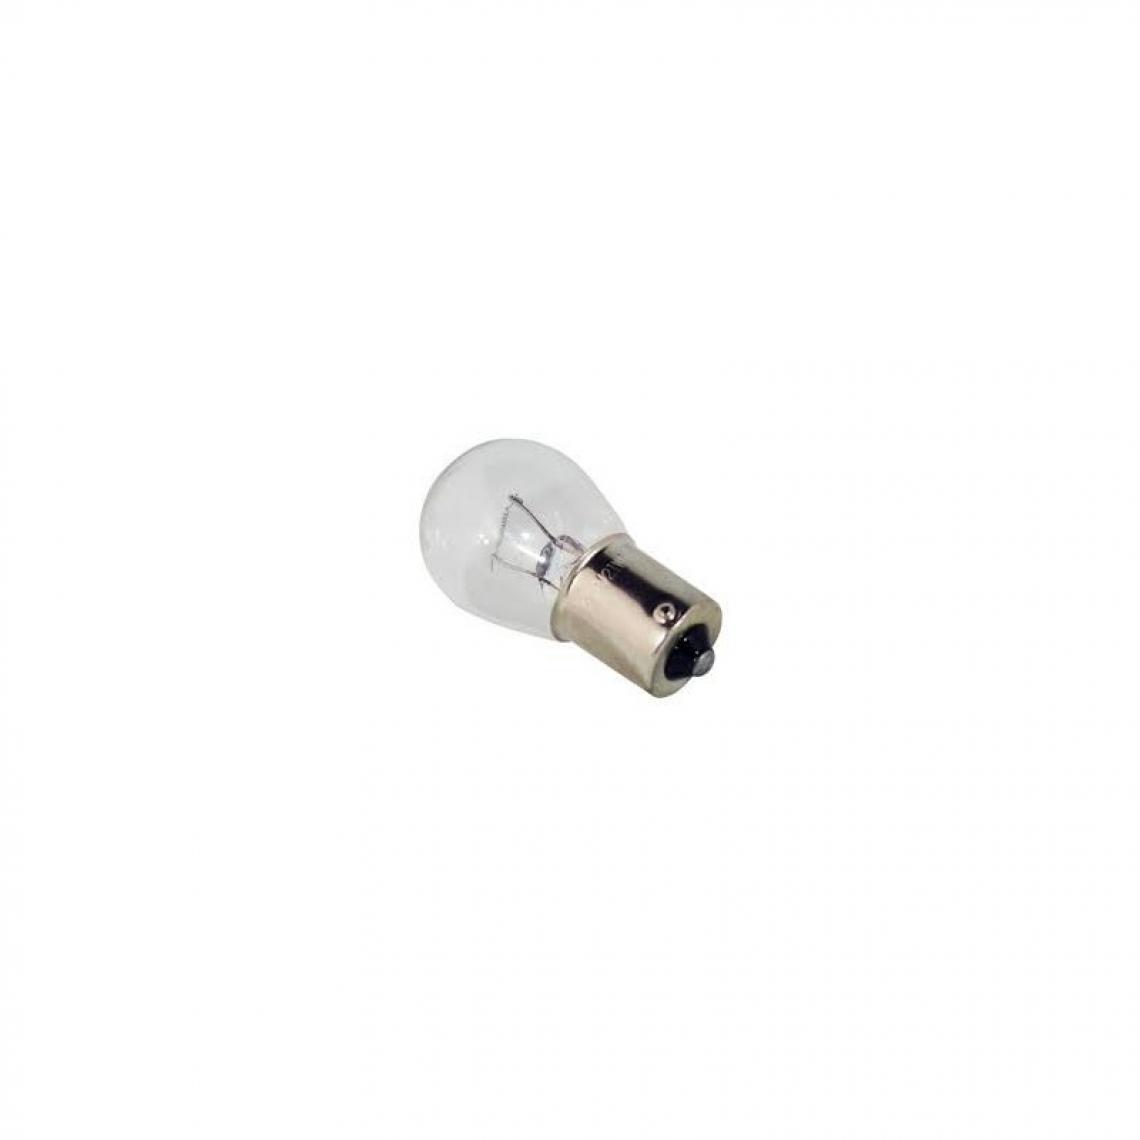 Philips - AMPOULE PHILIPS 13498MLCP P21W 13498 ML 24V - Ampoules LED